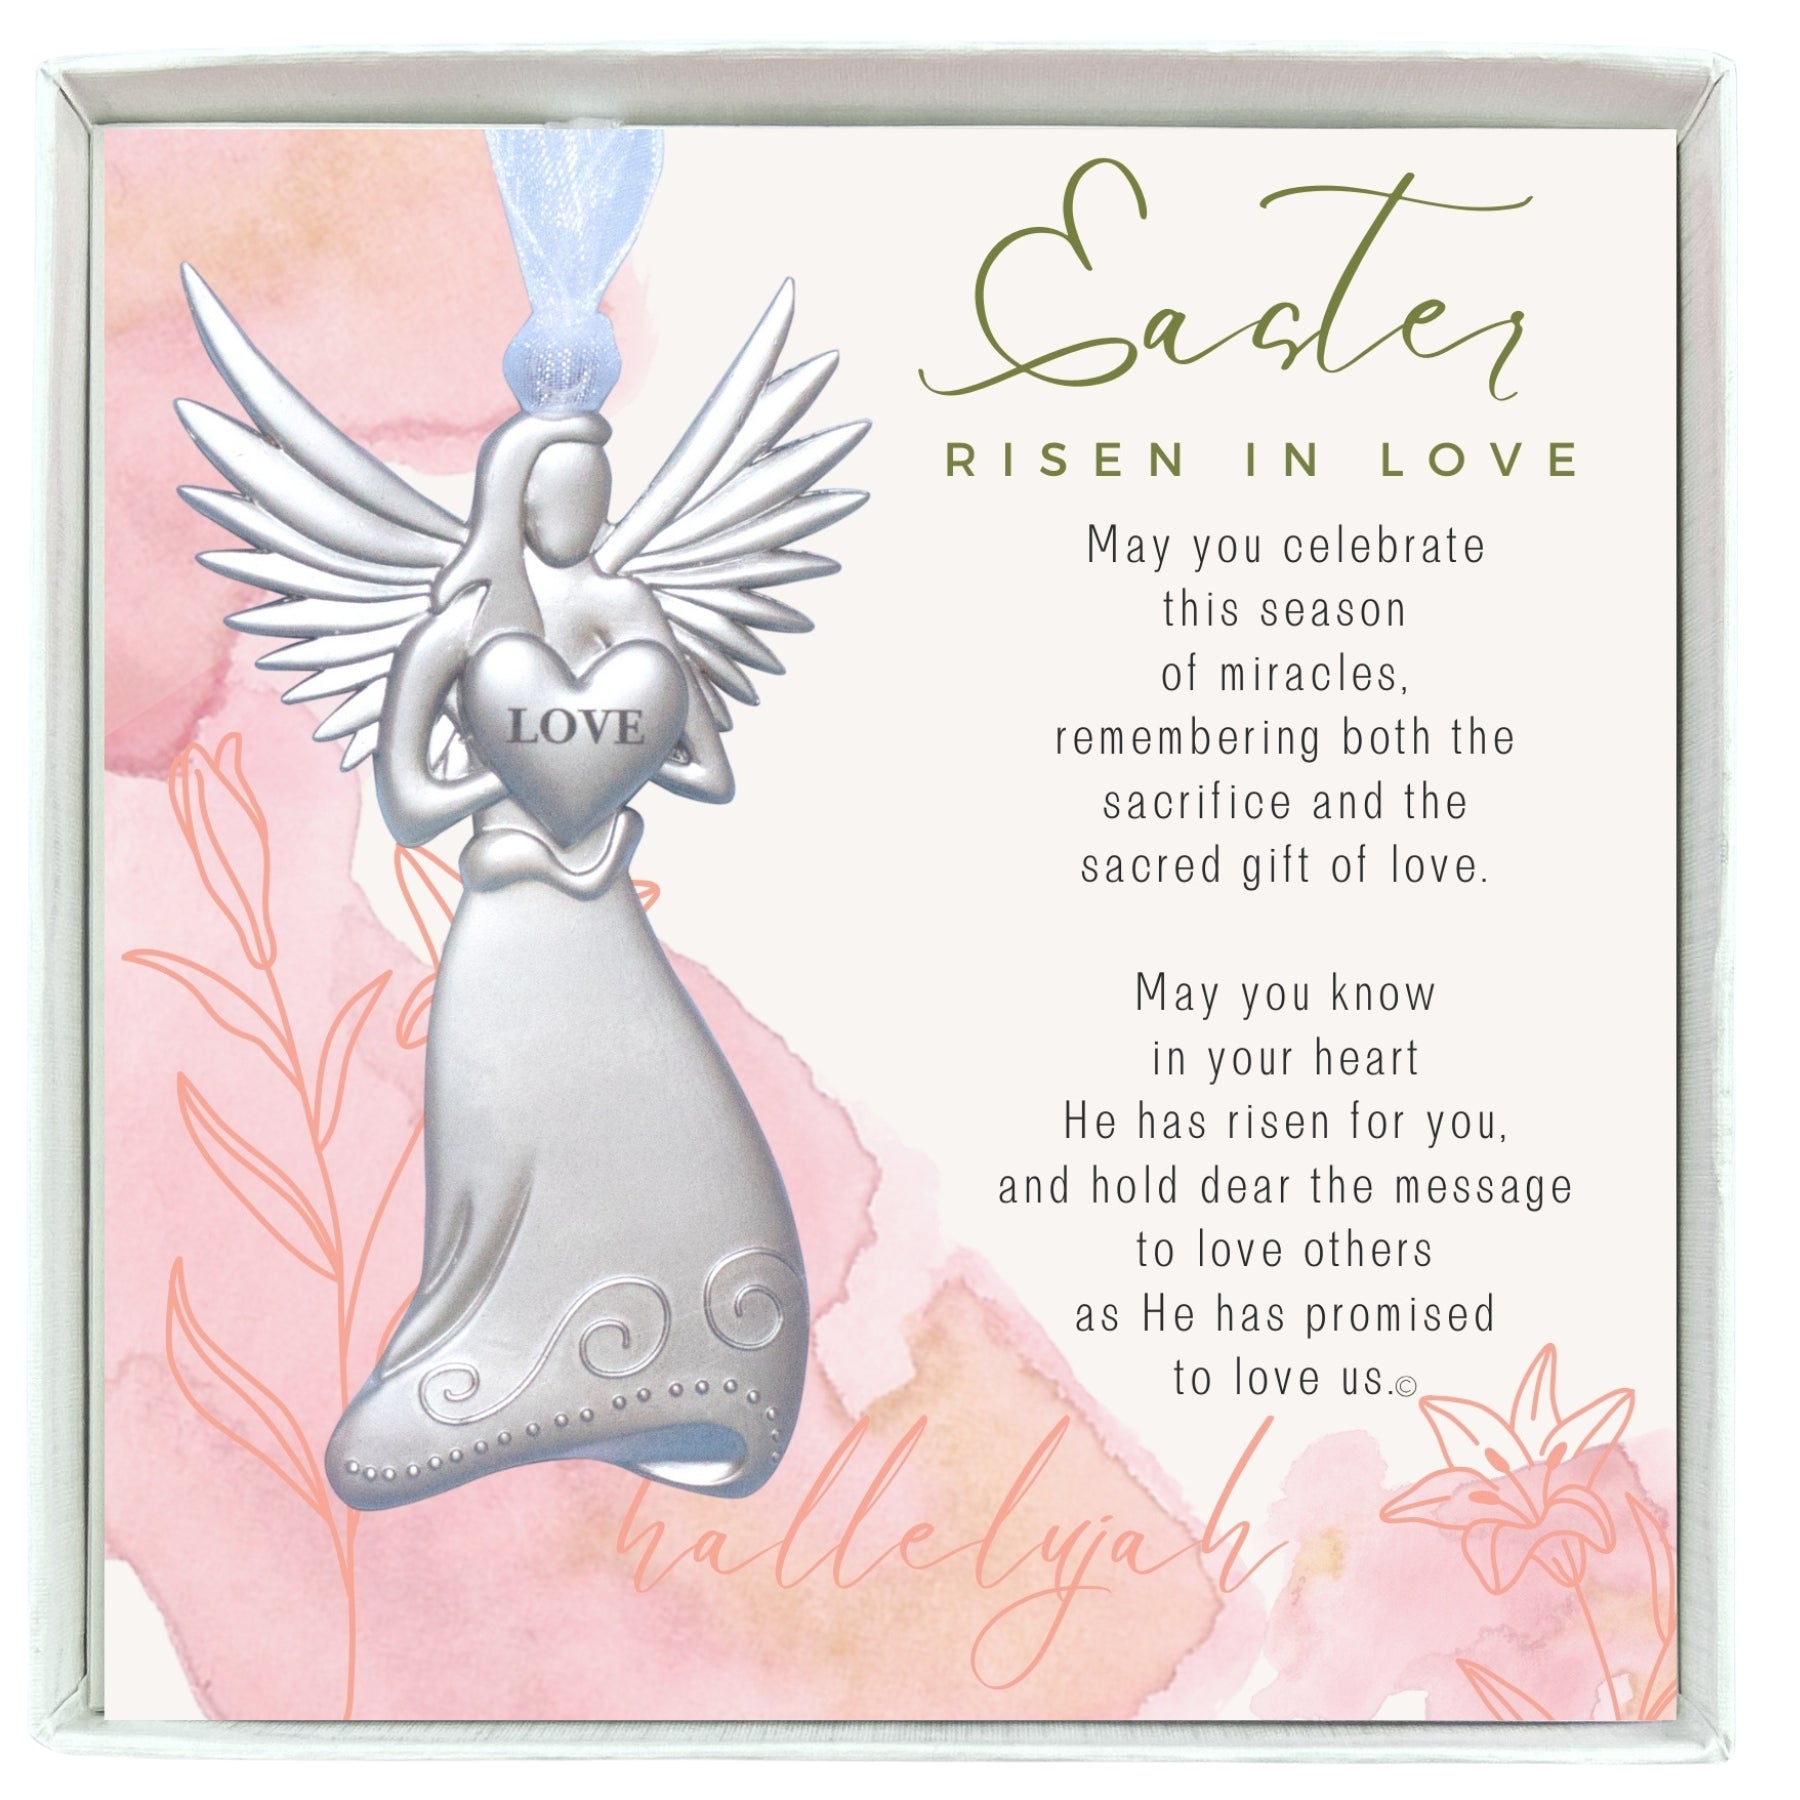 Easter Angel Gift - 4" metal love angel ornament with "Easter Risen in Love" sentiment in white box with clear lid.